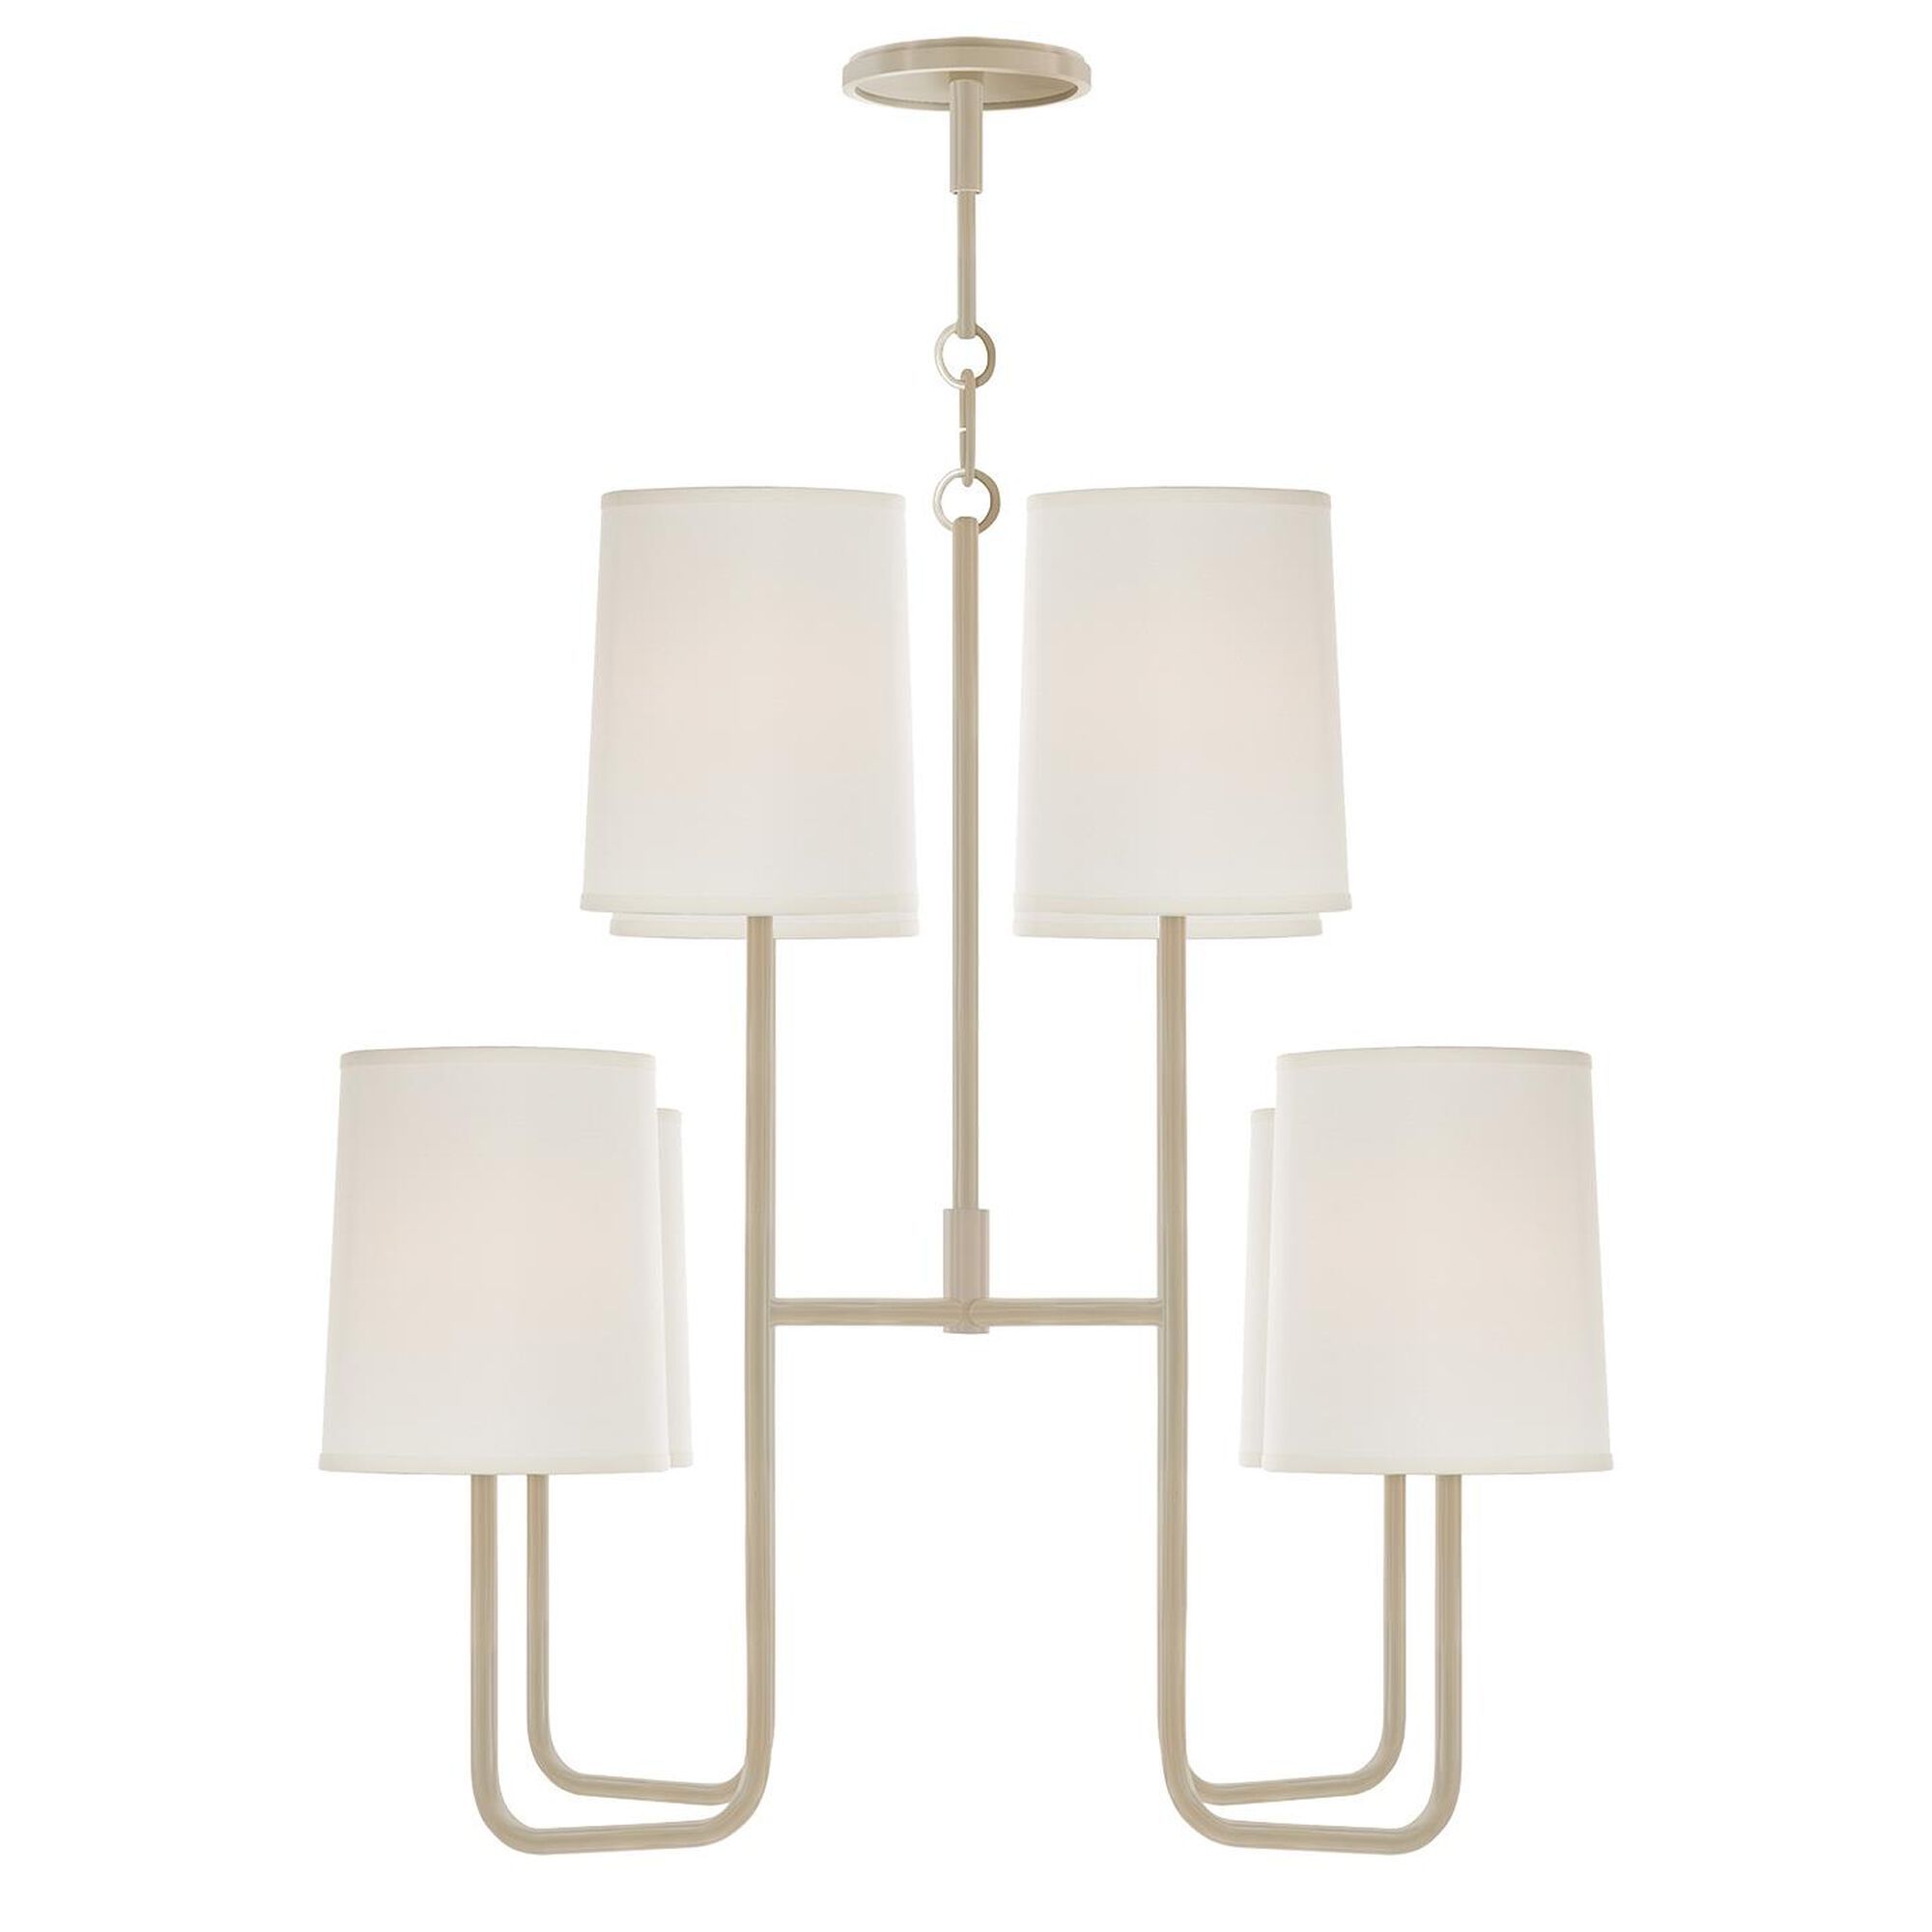 Barbara Barry Go Lightly 31 Inch 8 Light Chandelier by Visual Comfort and Co. | Capitol Lighting 1800lighting.com